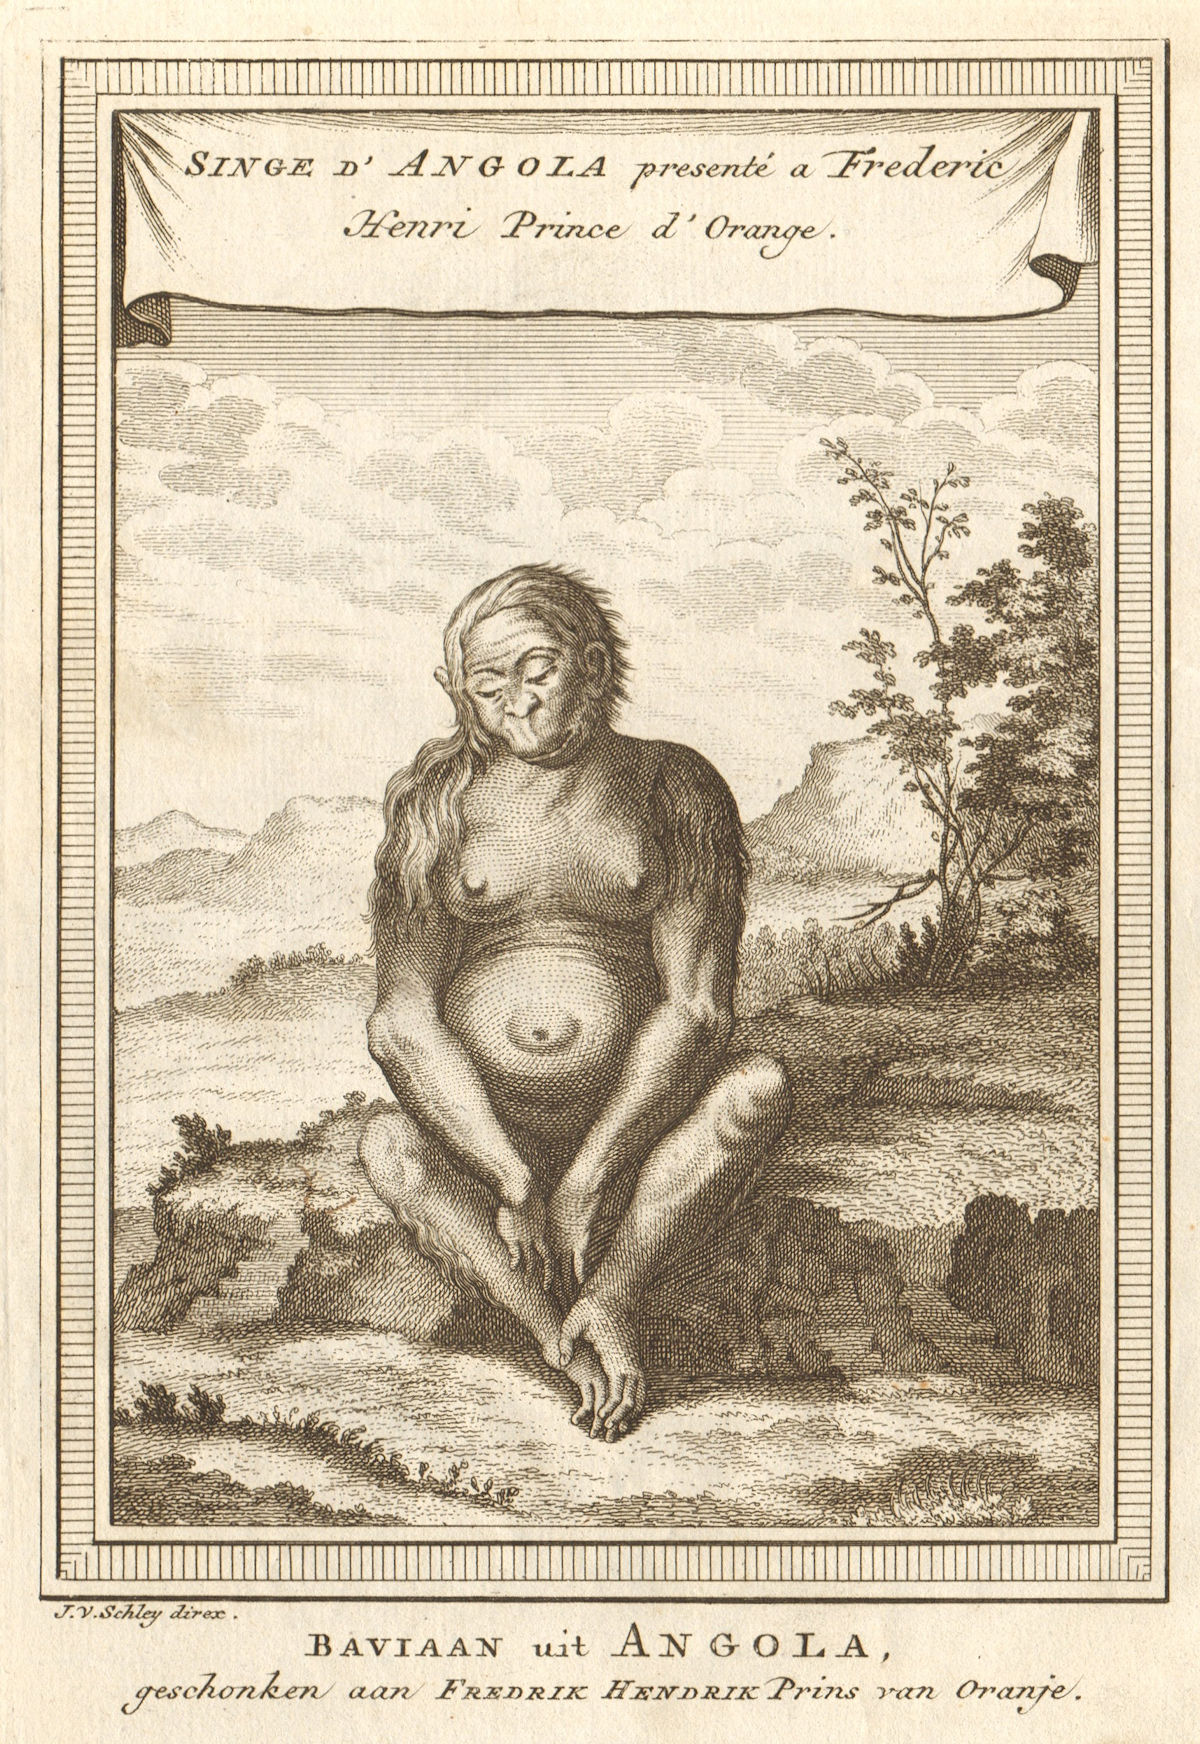 Monkey from Angola, presented to Frederick Henry, Prince of Orange. SCHLEY 1748